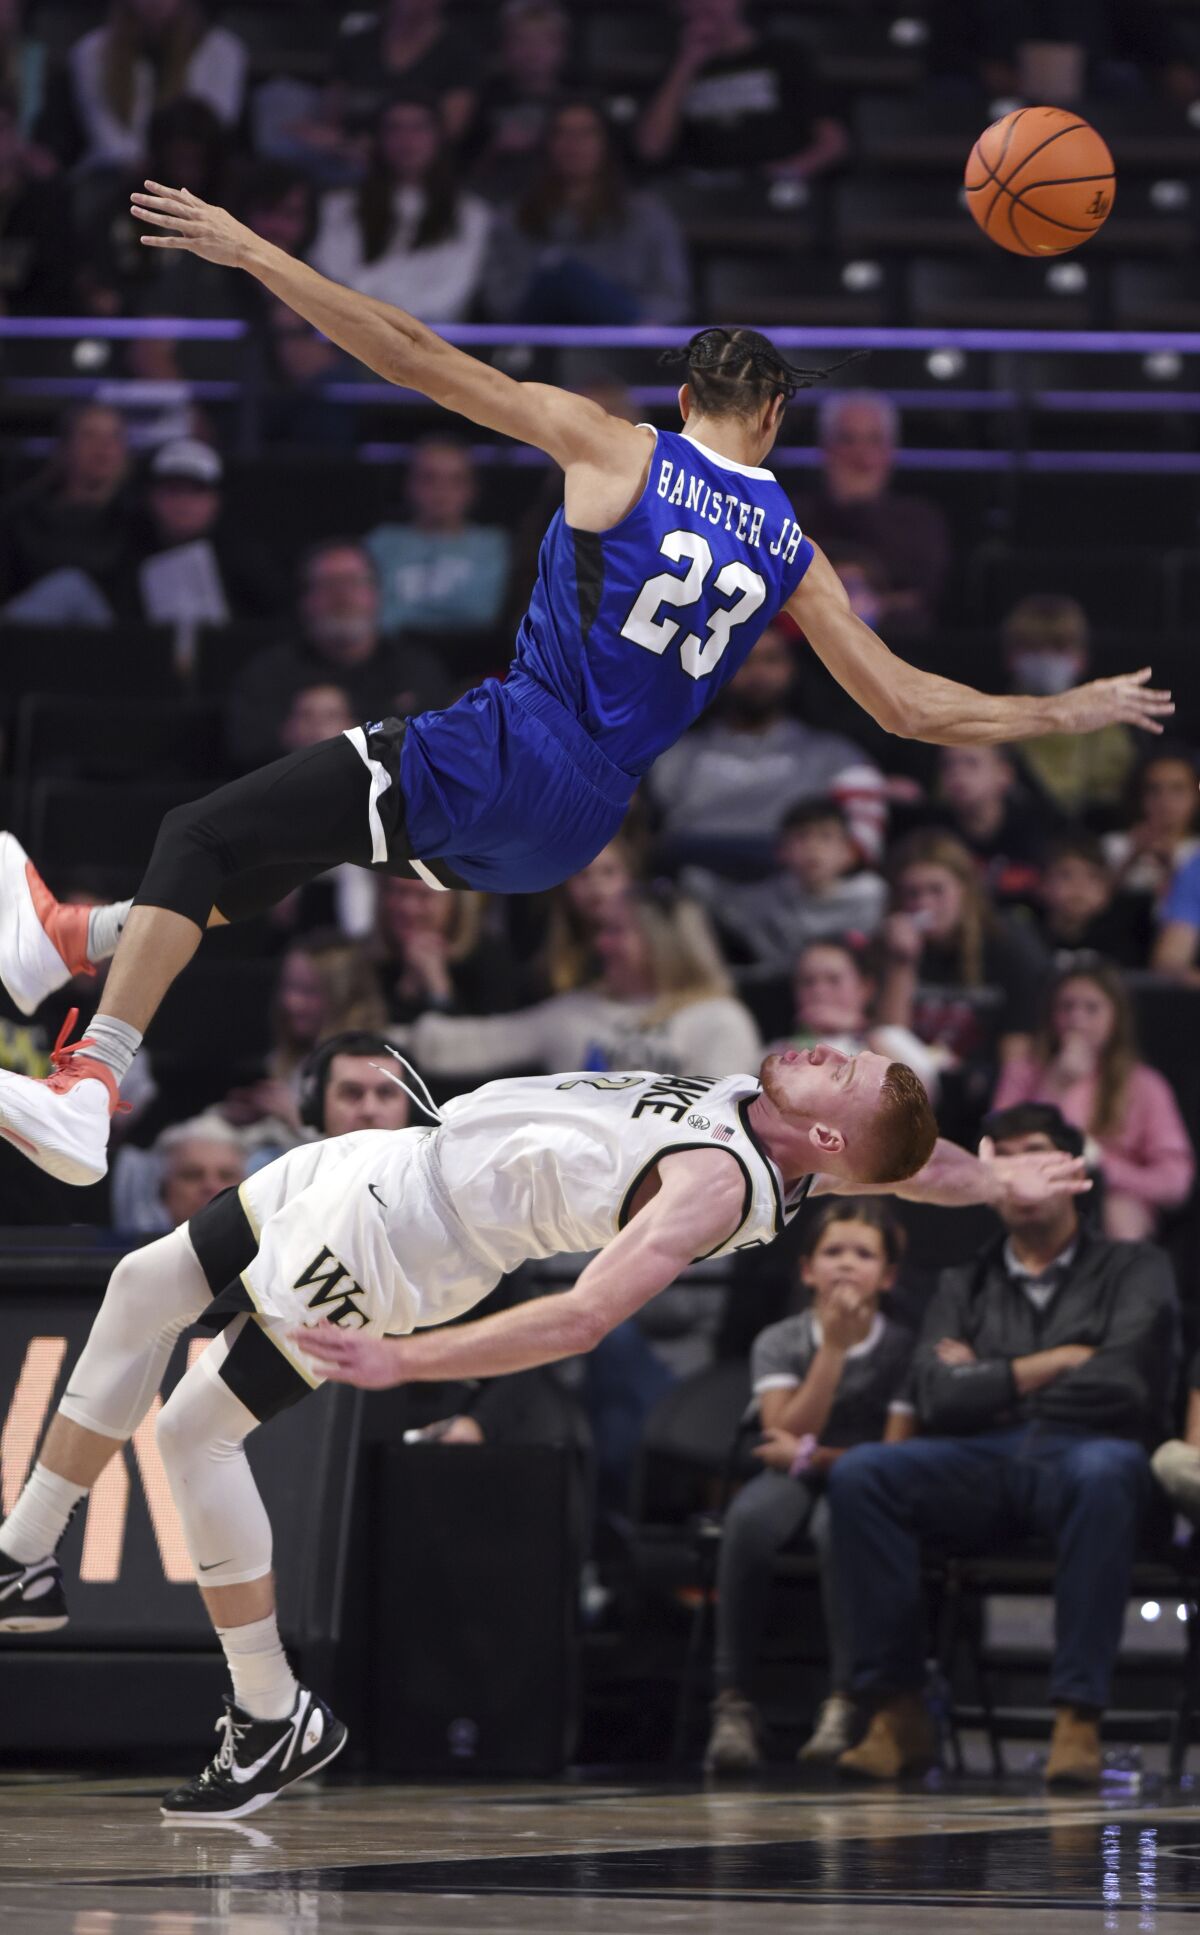 Wake Forest's Cameron Hildreth is called for a block as Hampton's Daniel Banister collides with Hildreth during an NCAA college basketball game, Saturday, Nov. 26, 2022, at Joel Coliseum in Winston-Salem, N.C. (Walt Unks/The Winston-Salem Journal via AP)